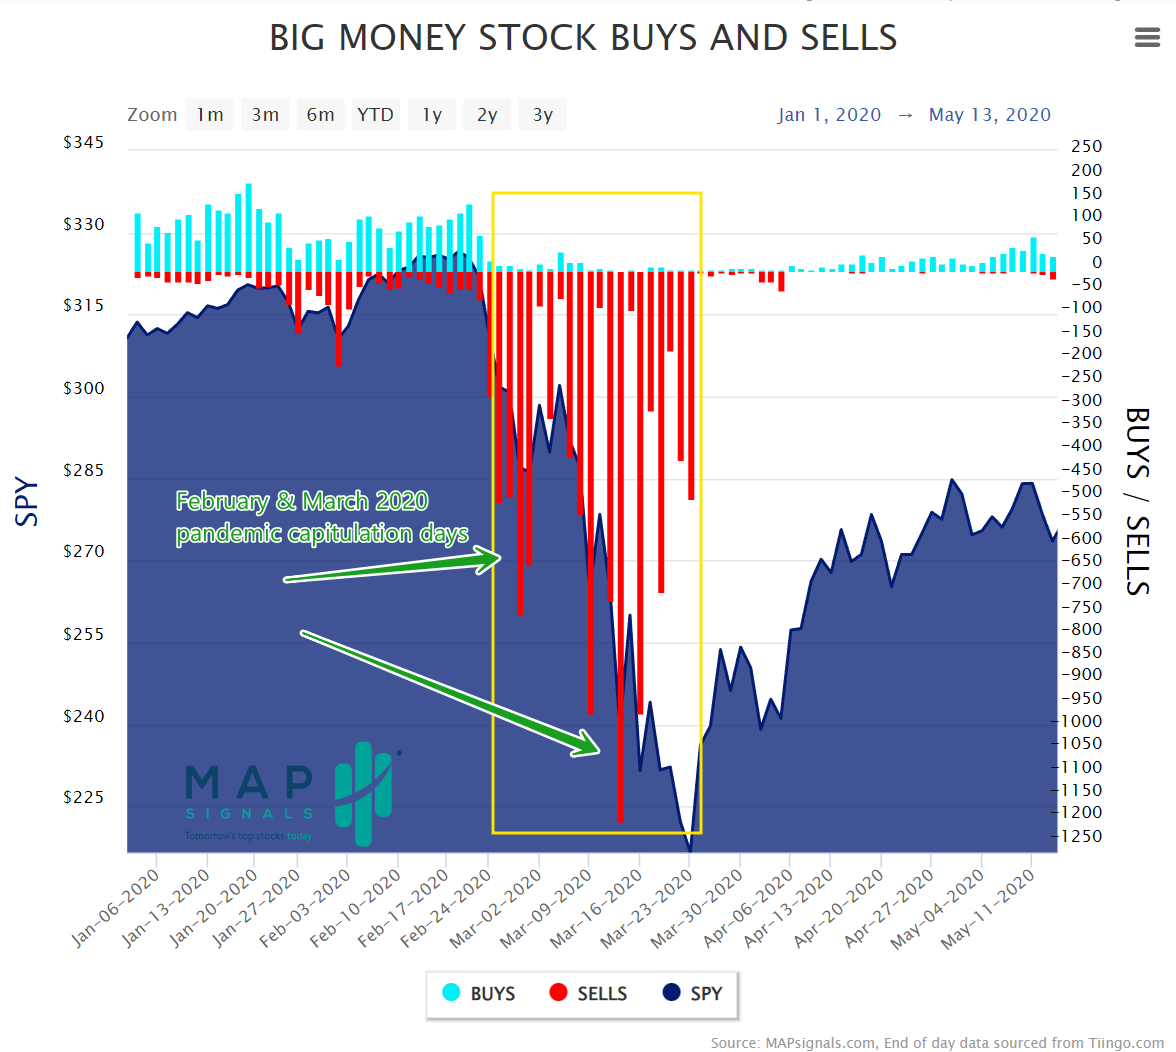 February & March 2020 pandemic capitulation days | Big Money Stock Buys and Sells